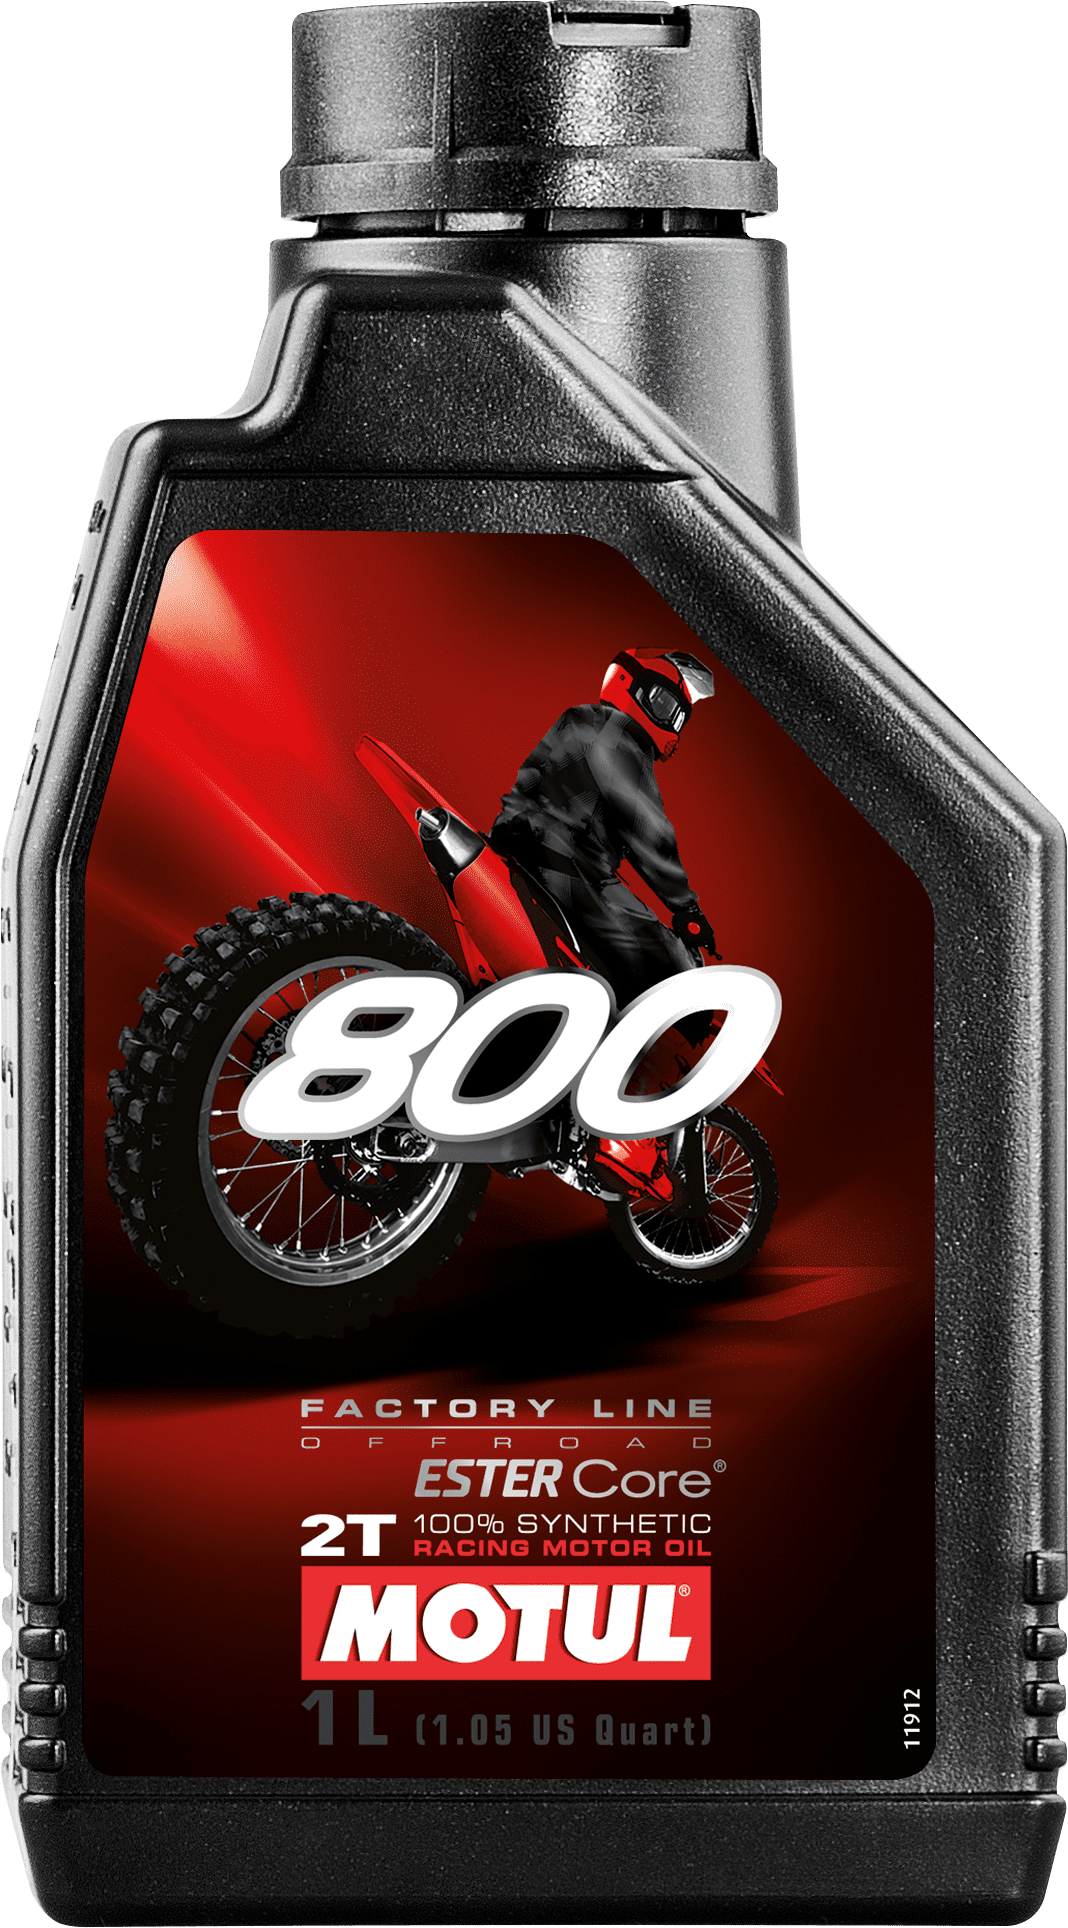 104038-1 100% Synthetic racing motor oil.